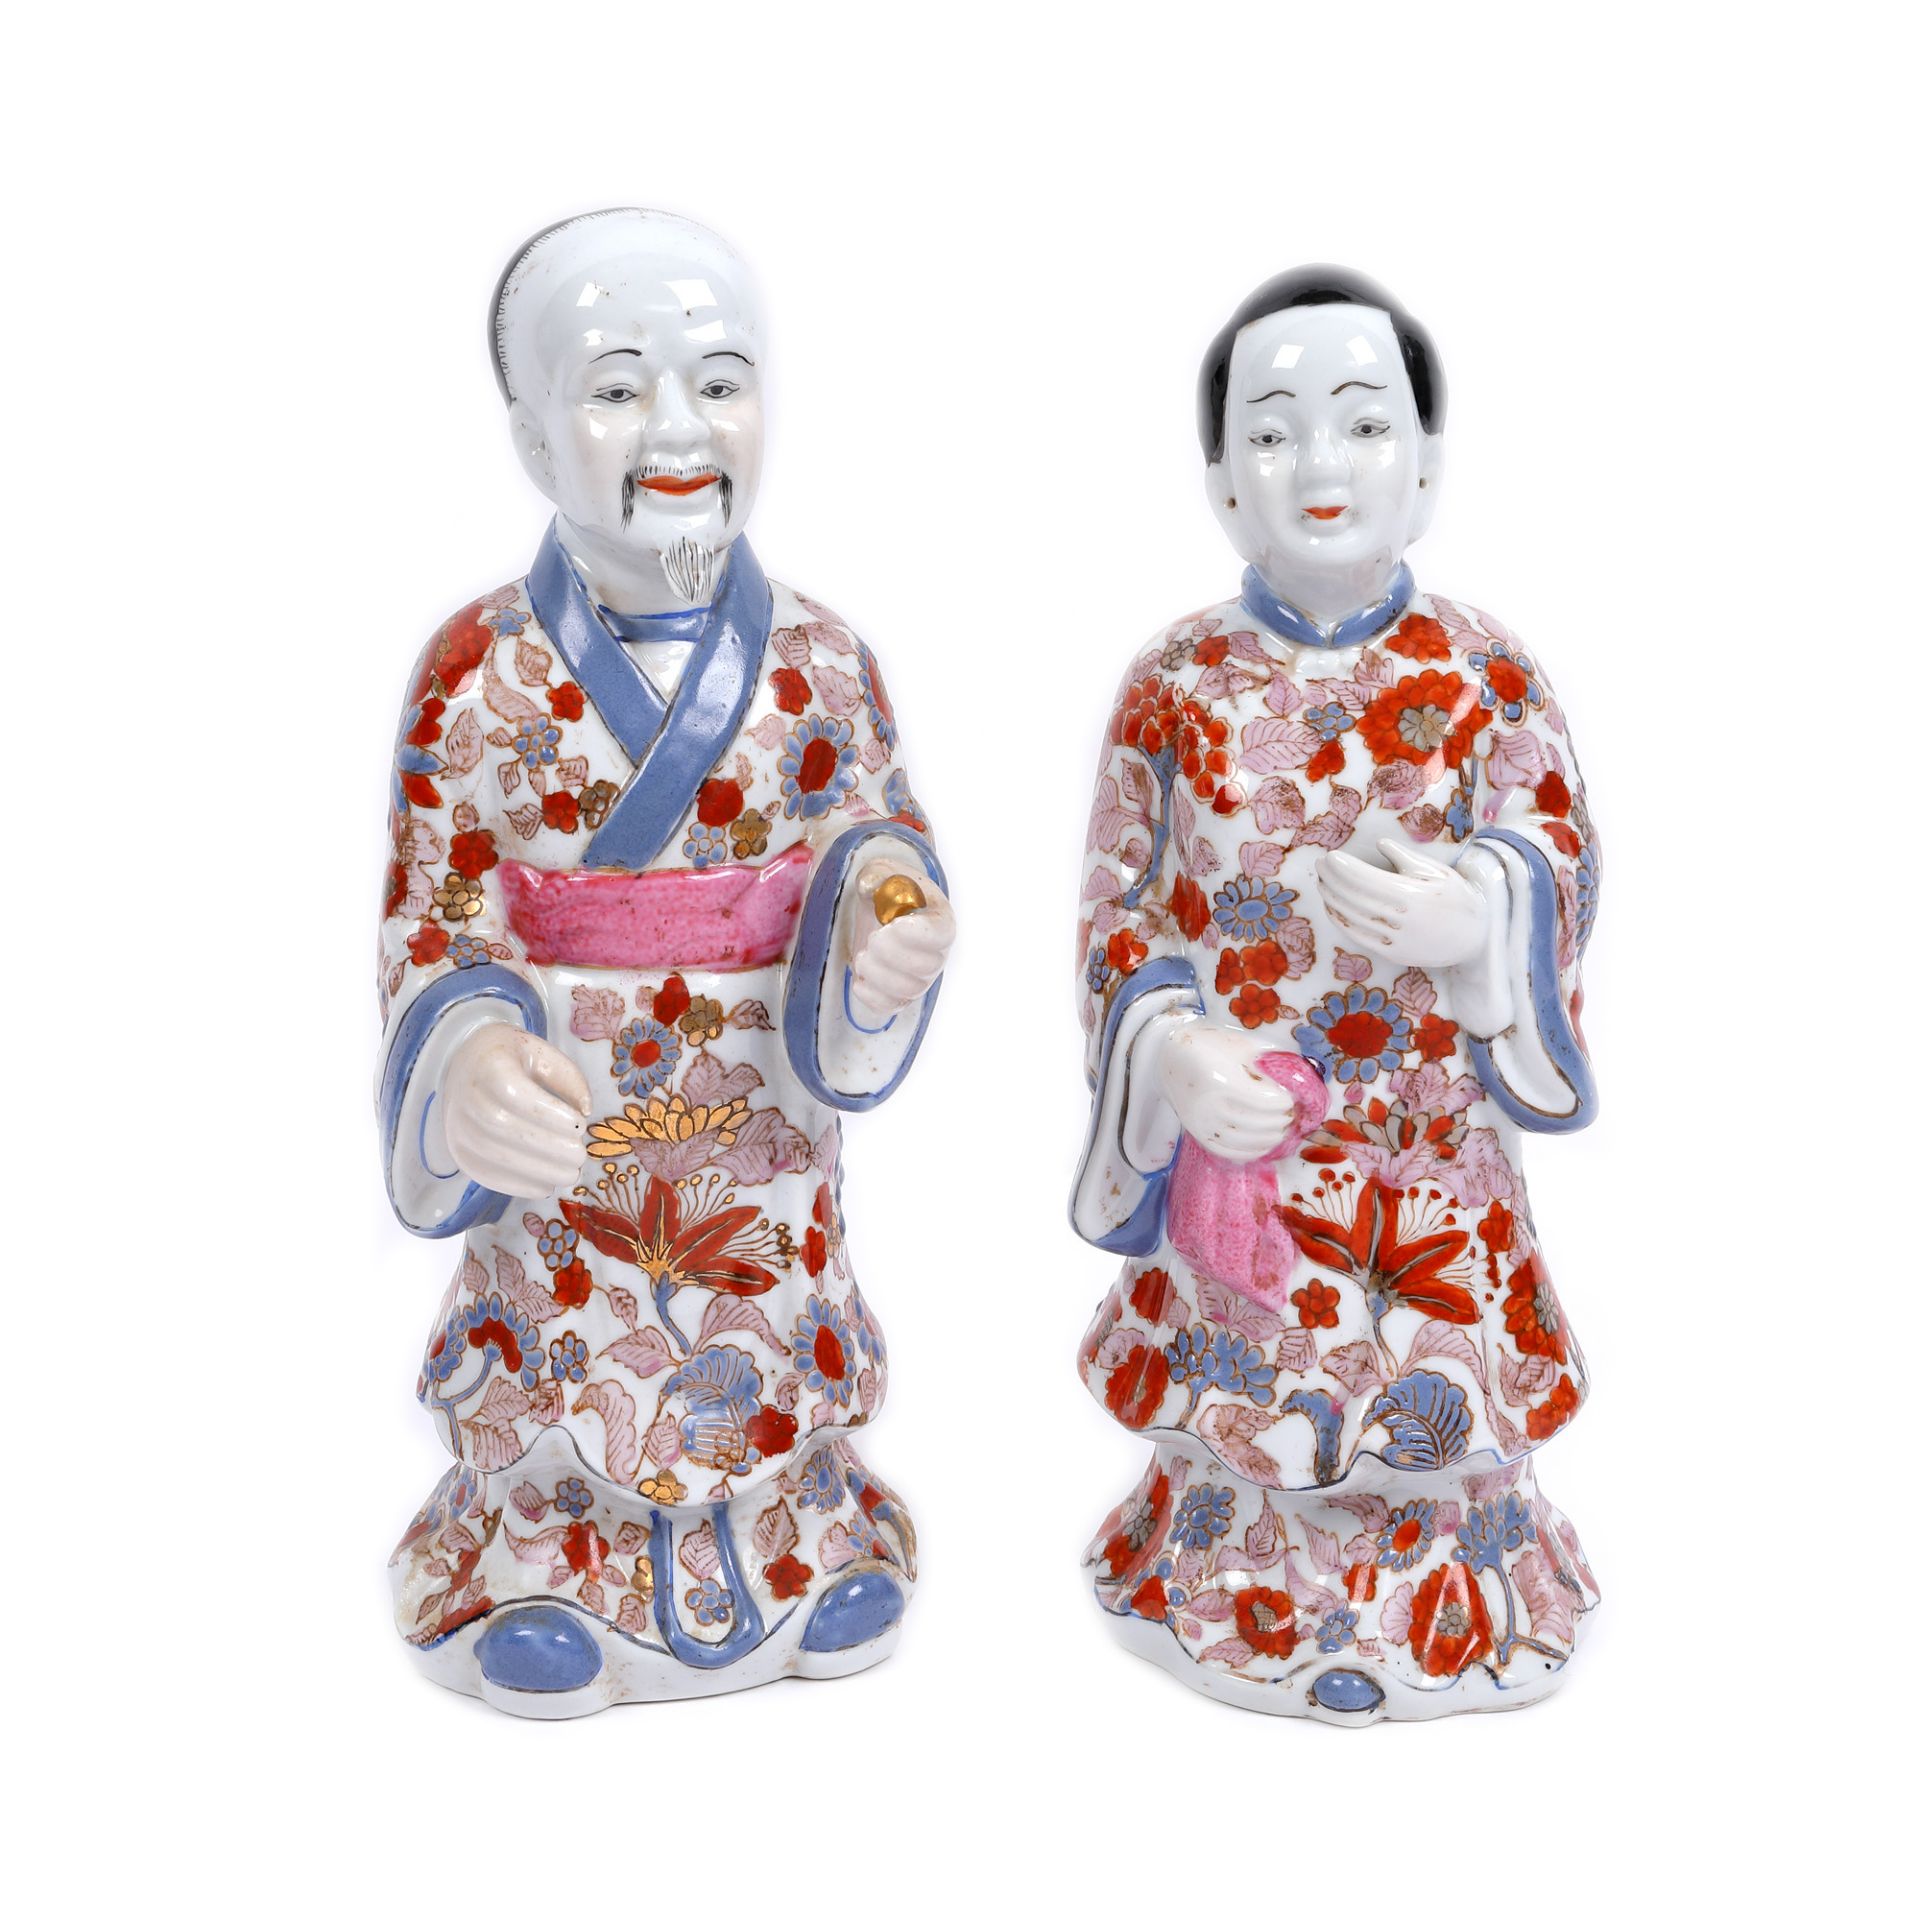 Pair of painted porcelain statues, Imari, representing a couple of noble people, Japan, first half o